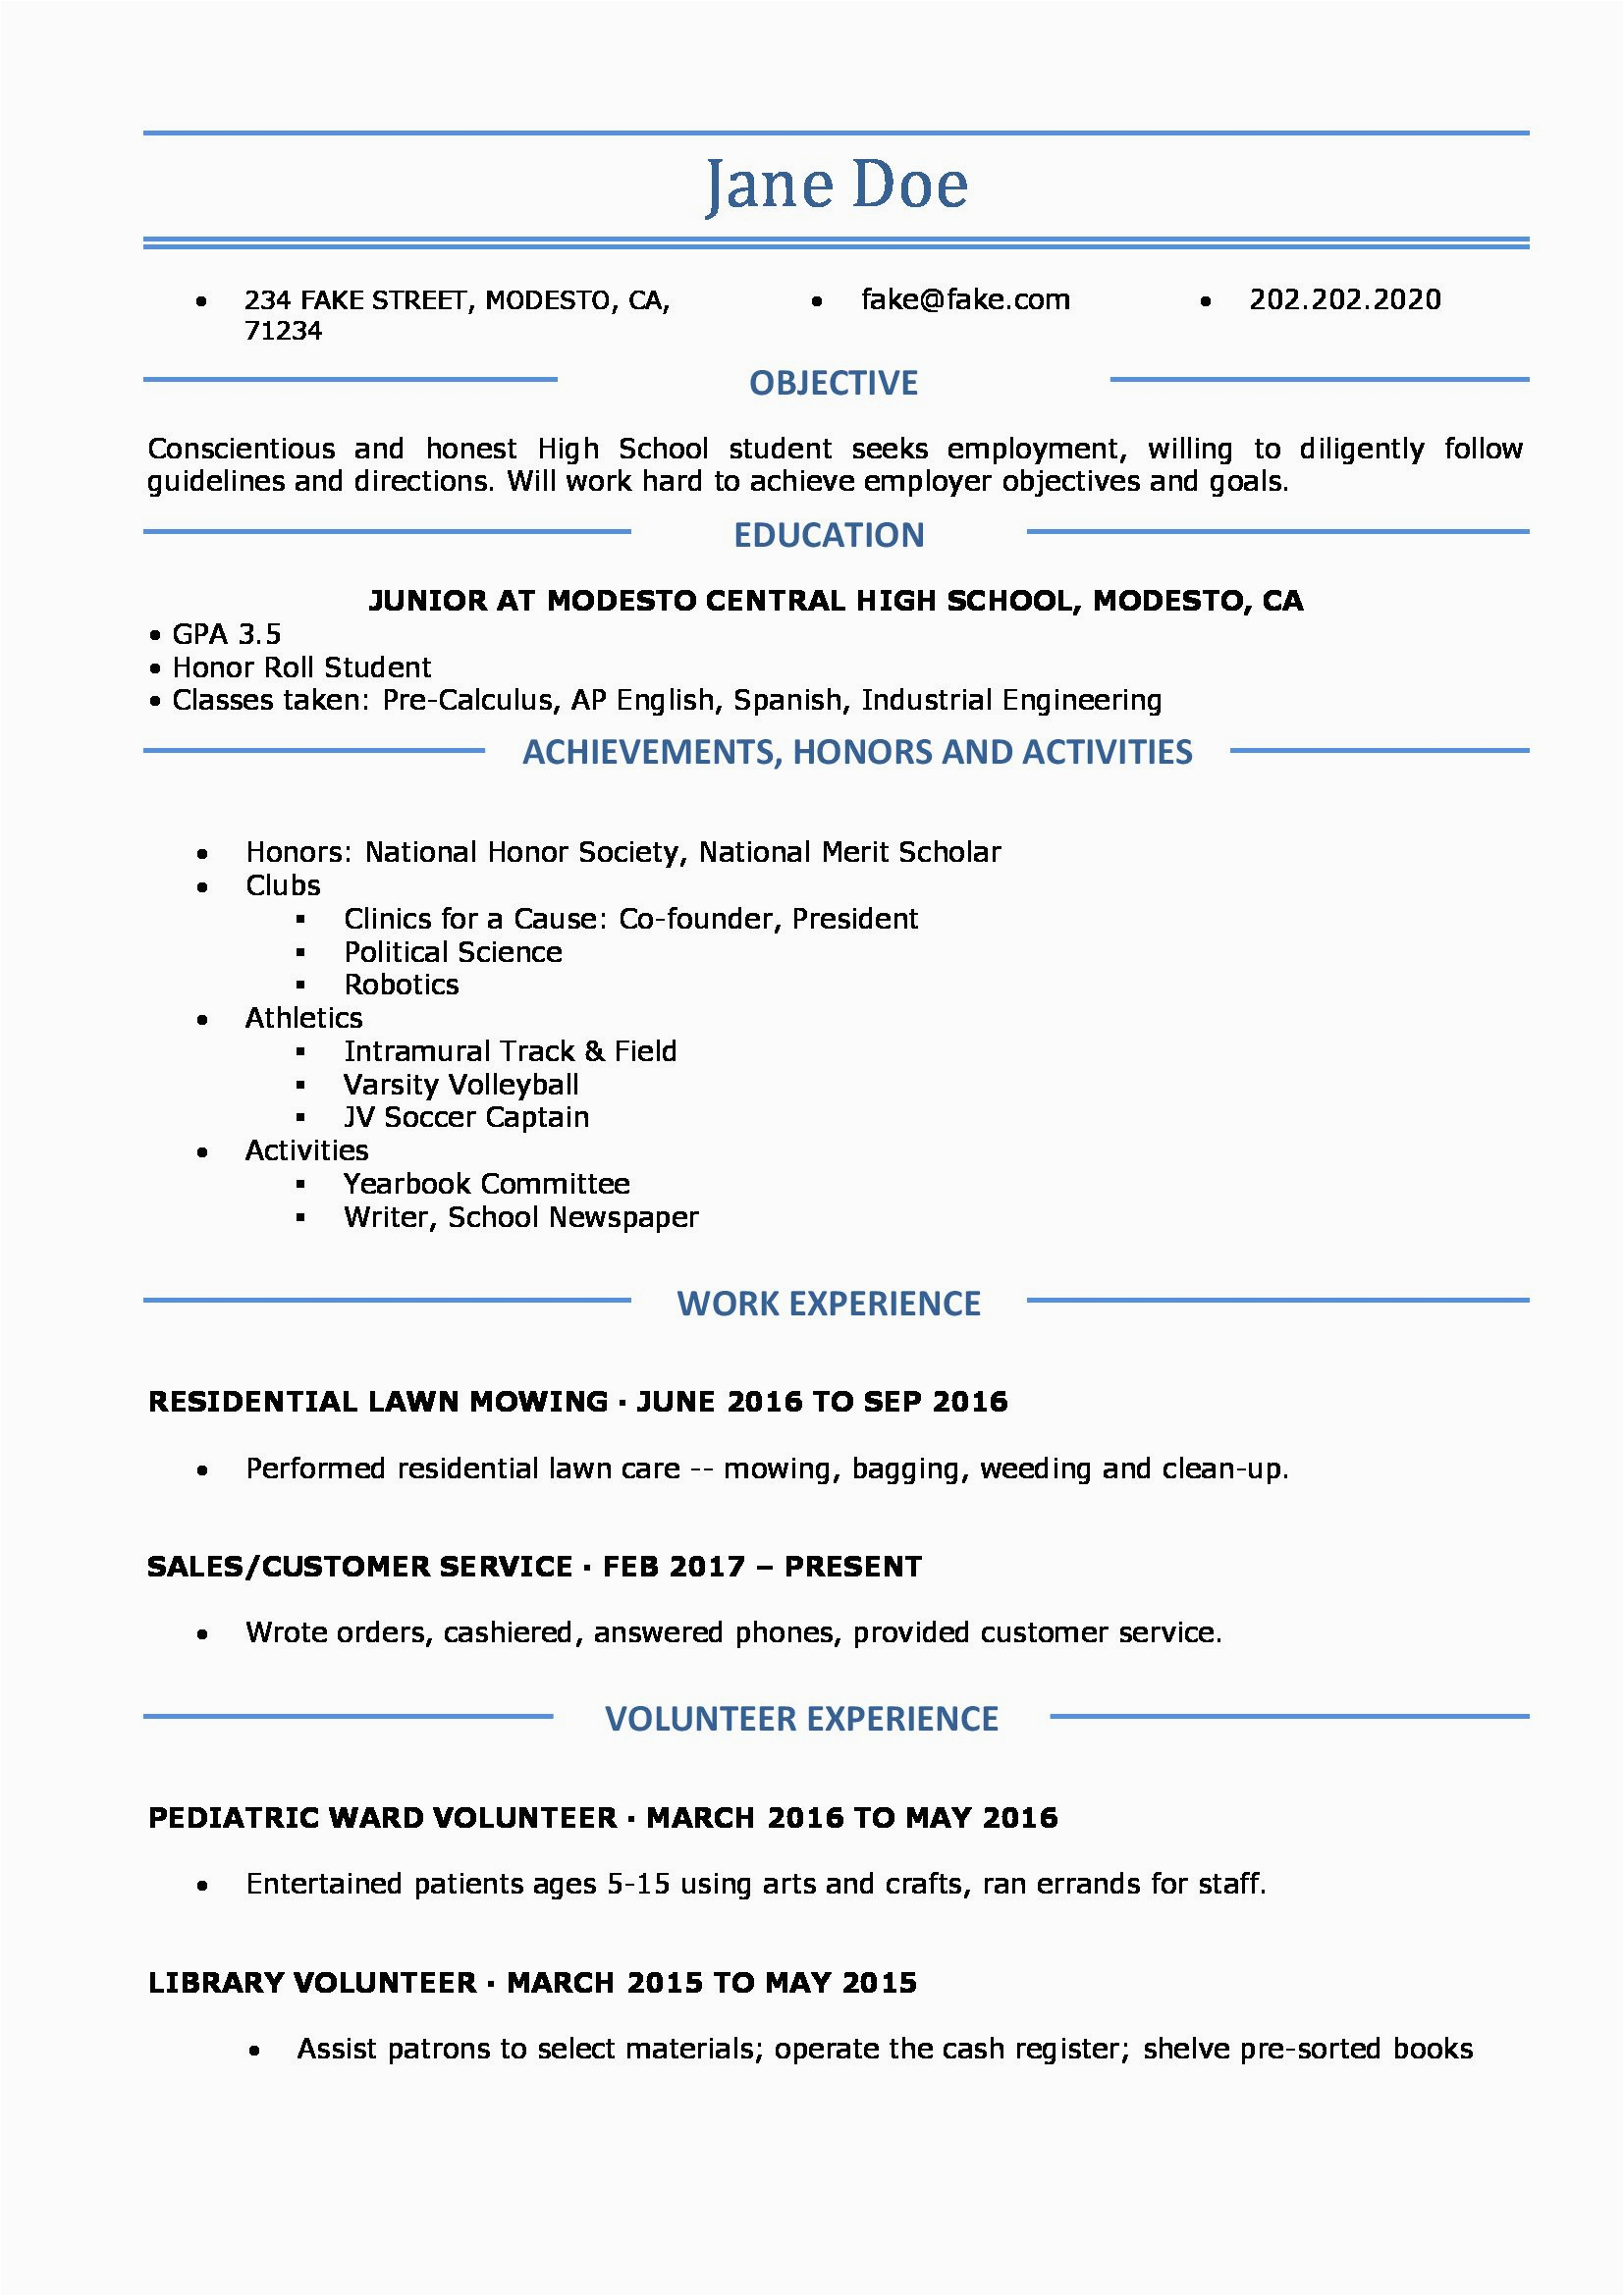 Easy Resume Template for High School Students Resumes for High School Students Luxury High School Resume